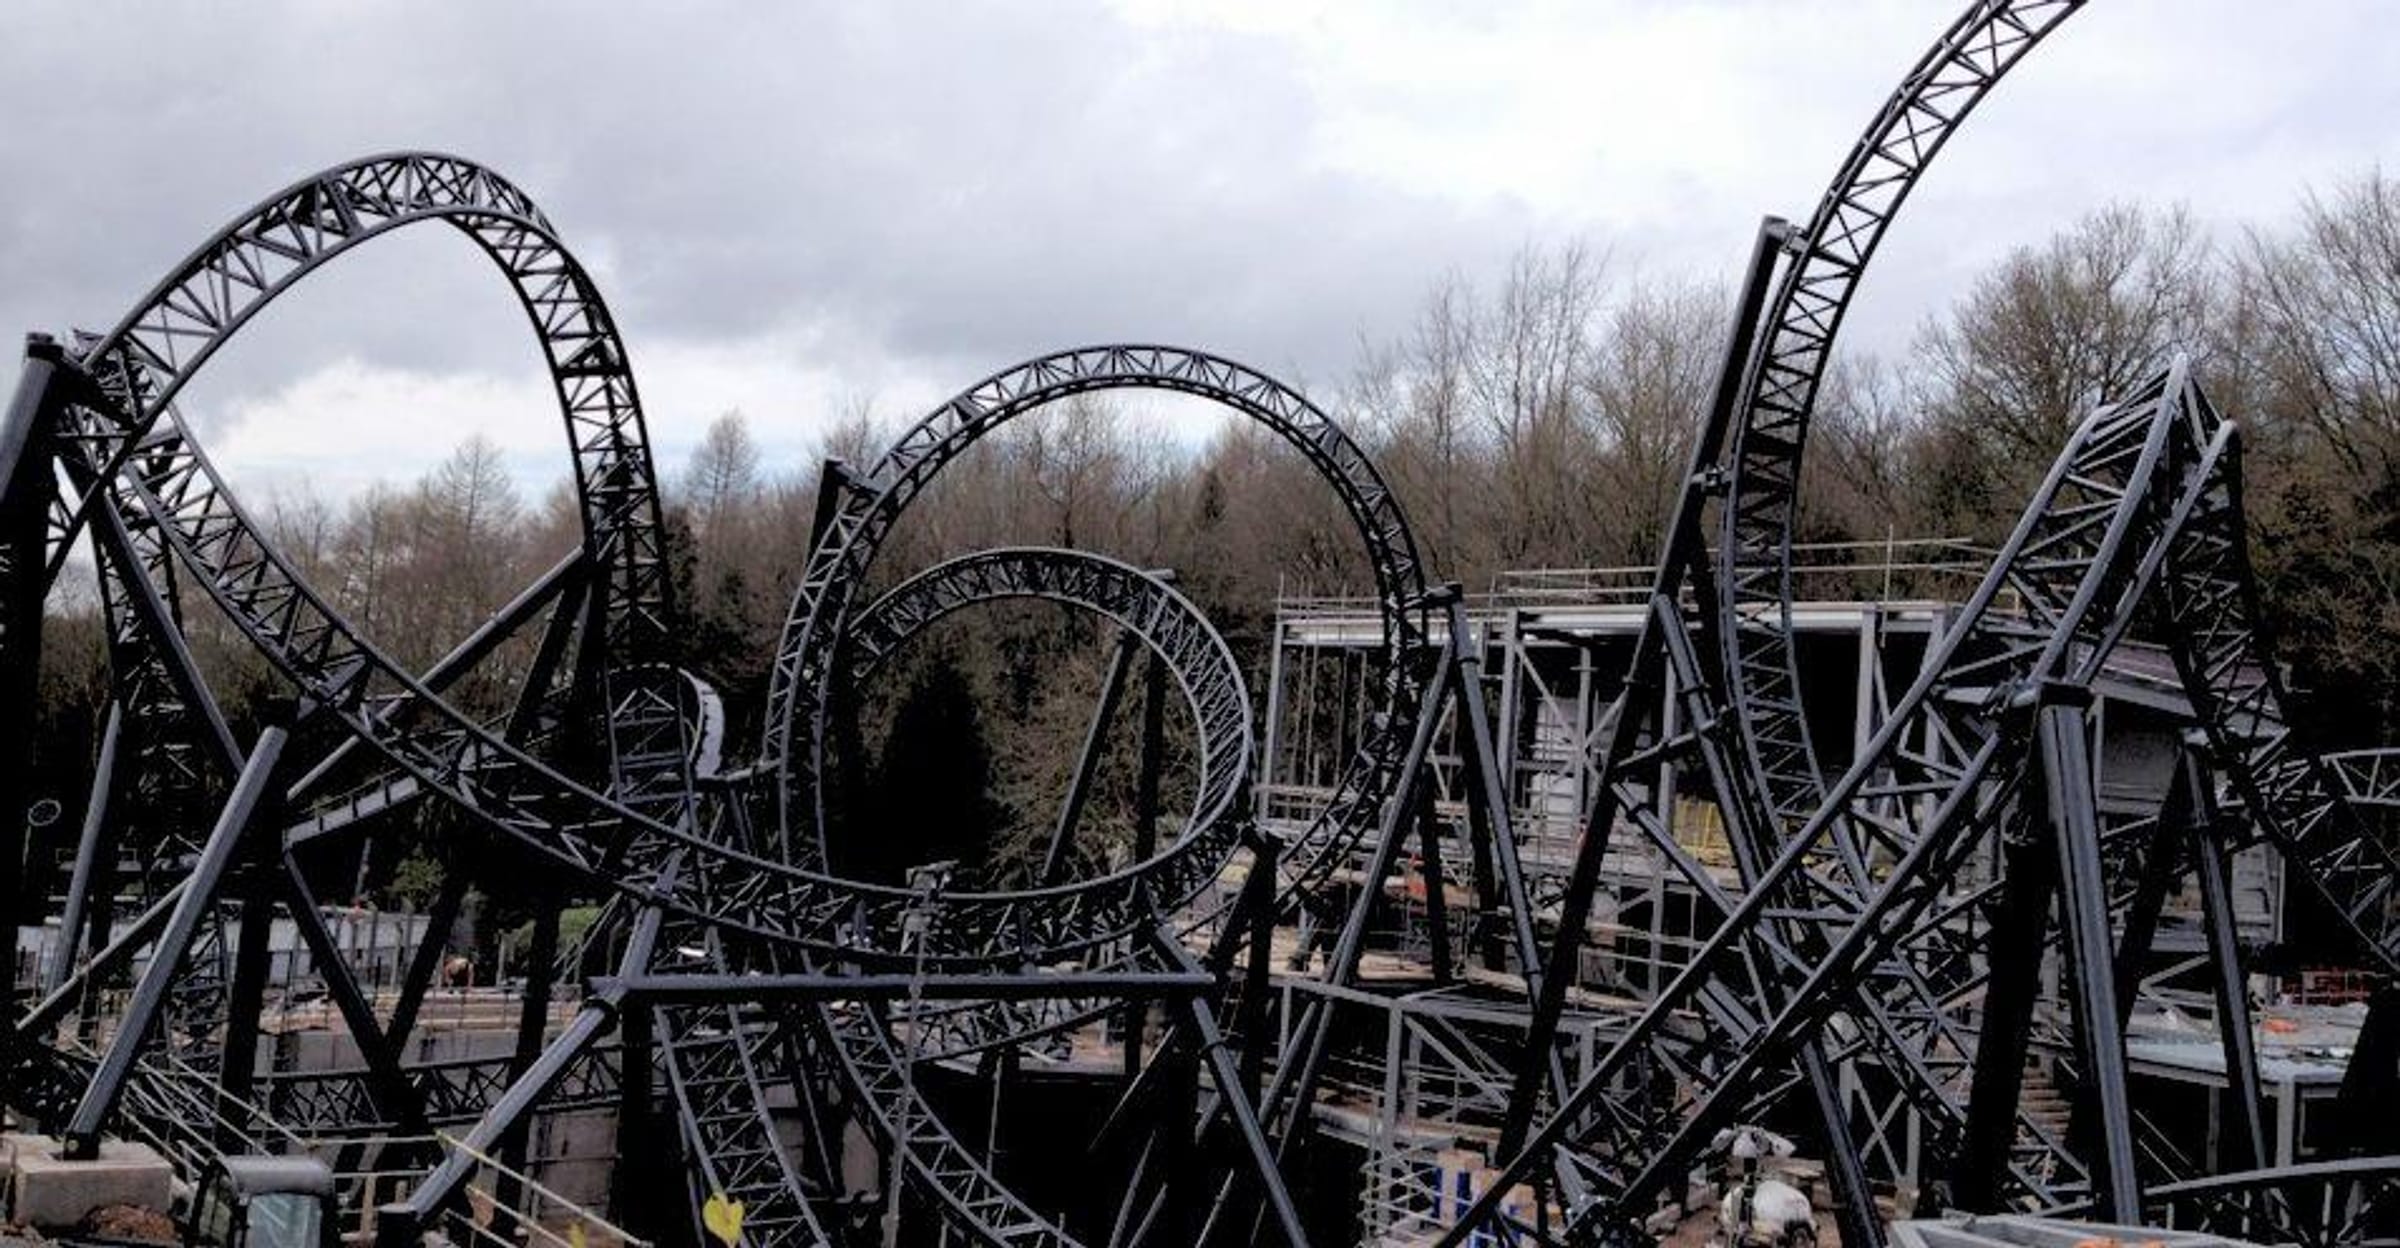 The 12 Most Ludicrously Dangerous Theme Park Rides Ever Created